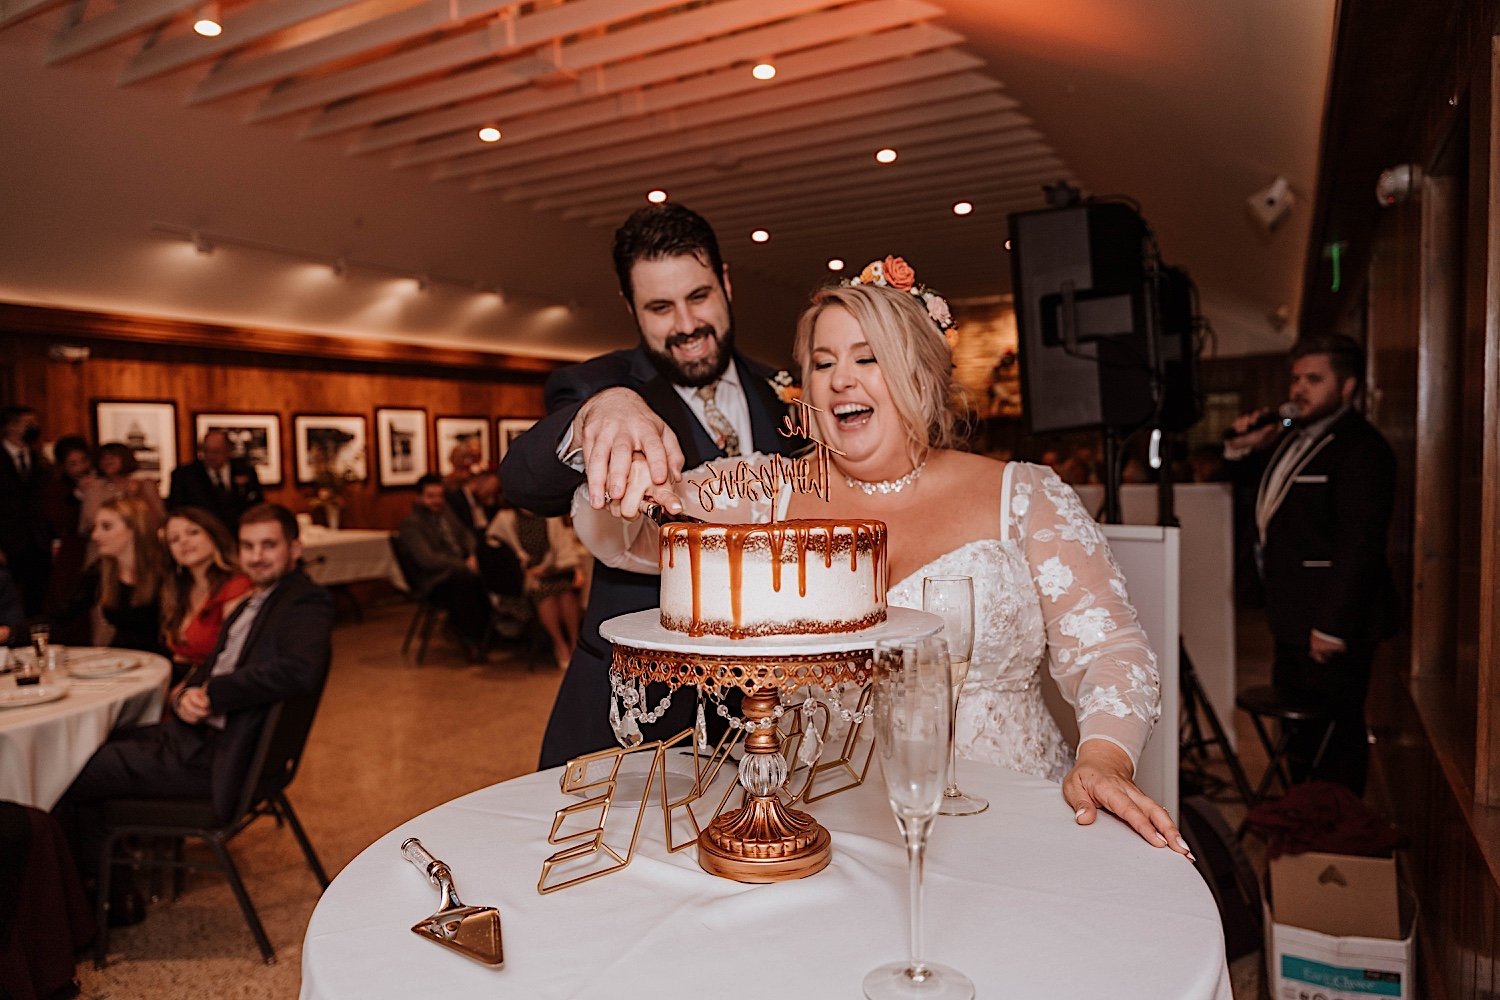 Bride and groom cut their cake together at Lake Ellyn Boathouse wedding